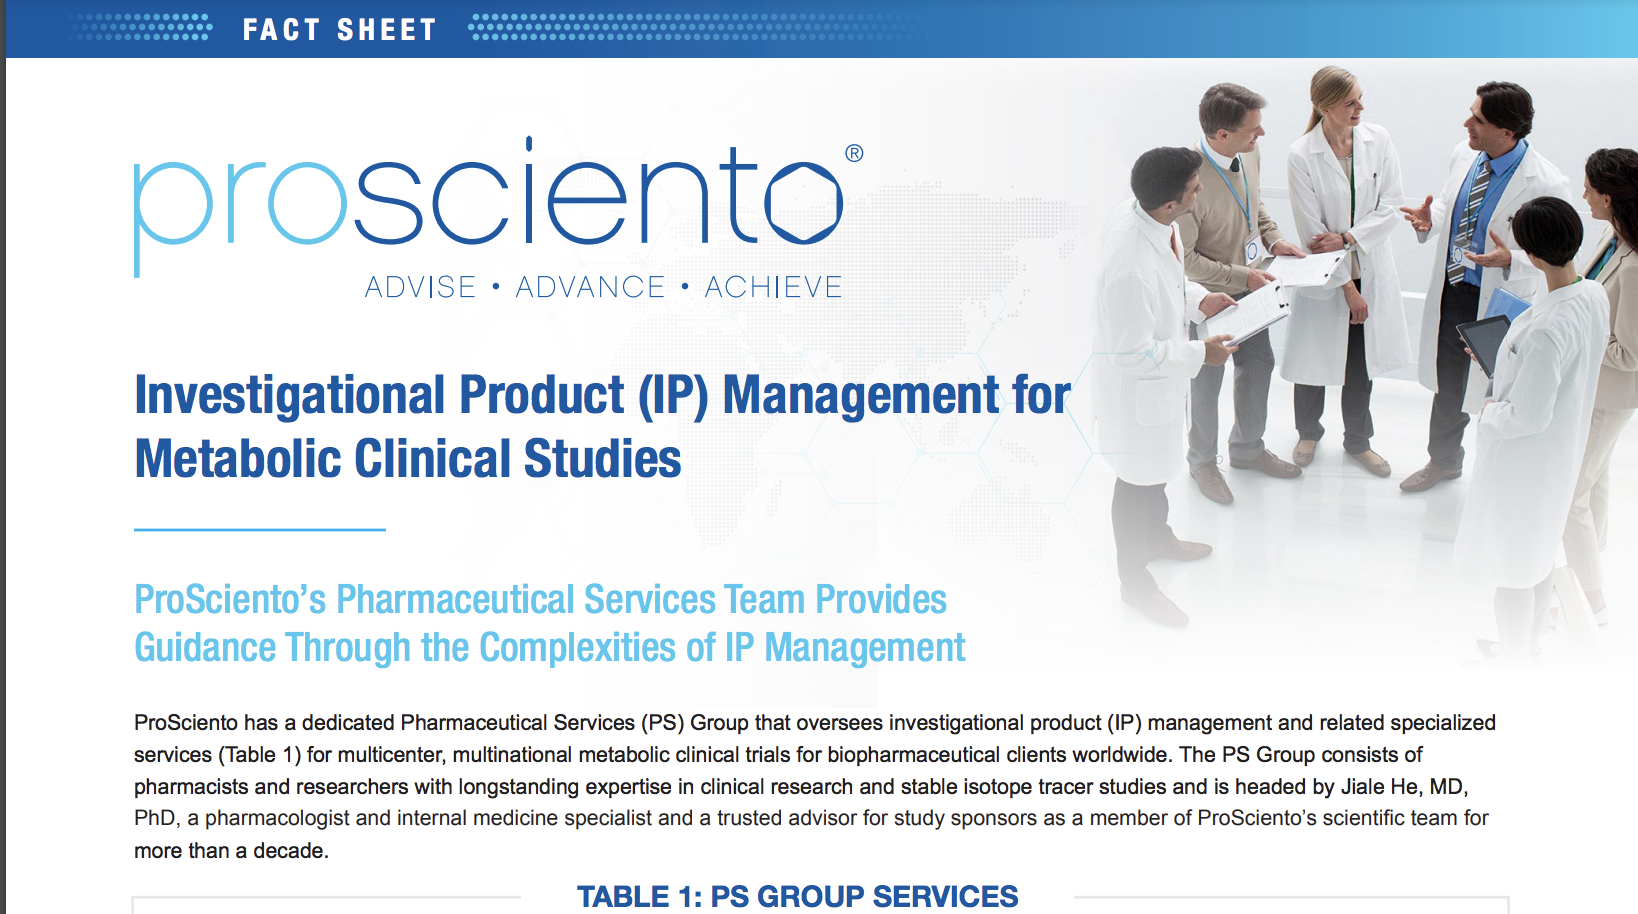 image of Investigational Product (IP) Management for Metabolic Clinical Studies